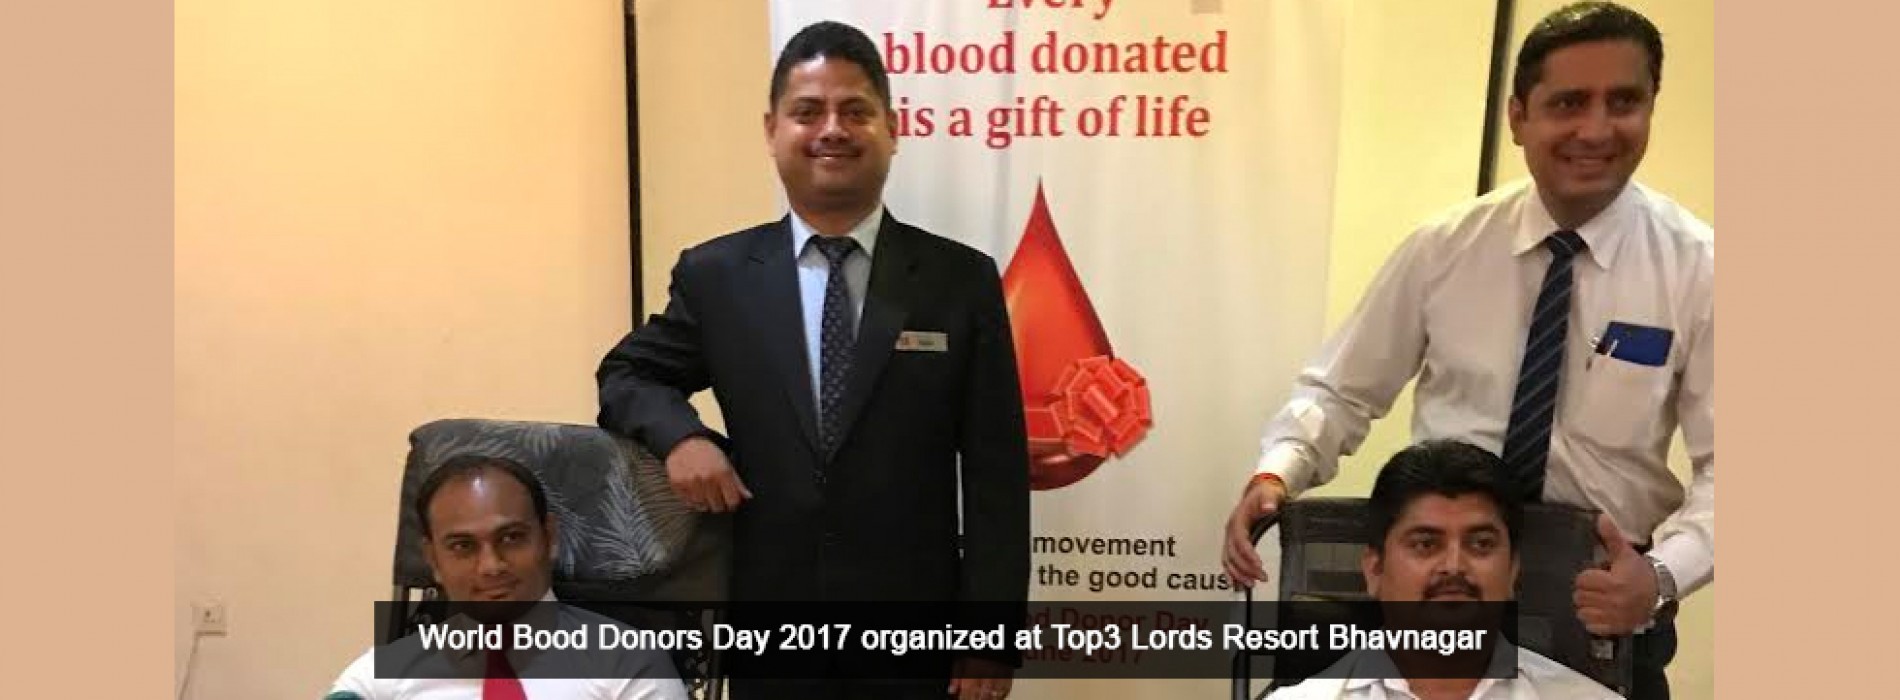 Lords Hotels & Resorts observes World Blood Donors Day